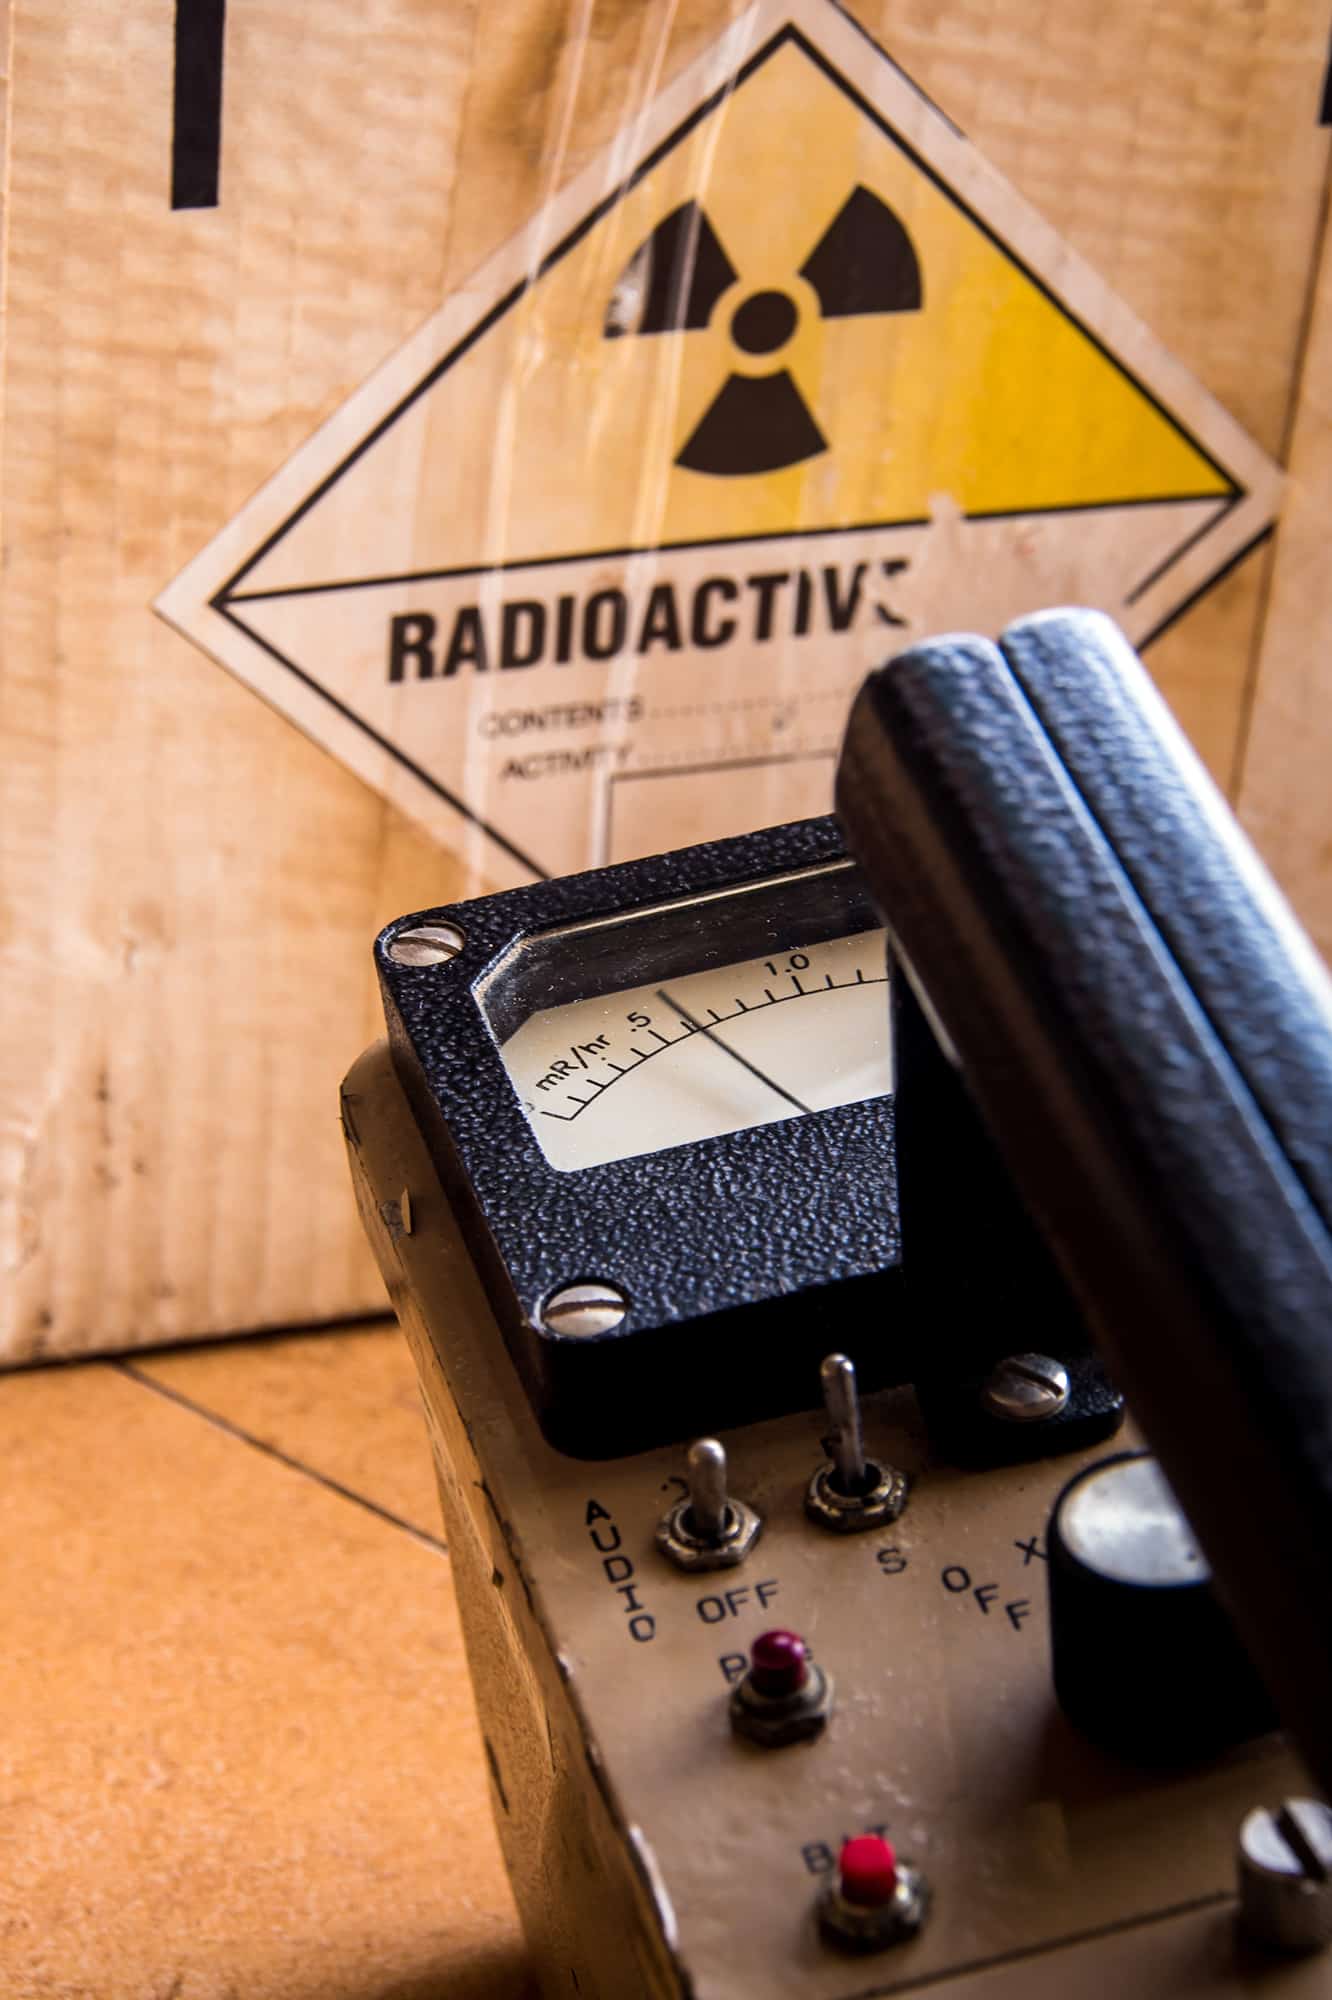 A geiger Counter being used to check the radiactivity of a box